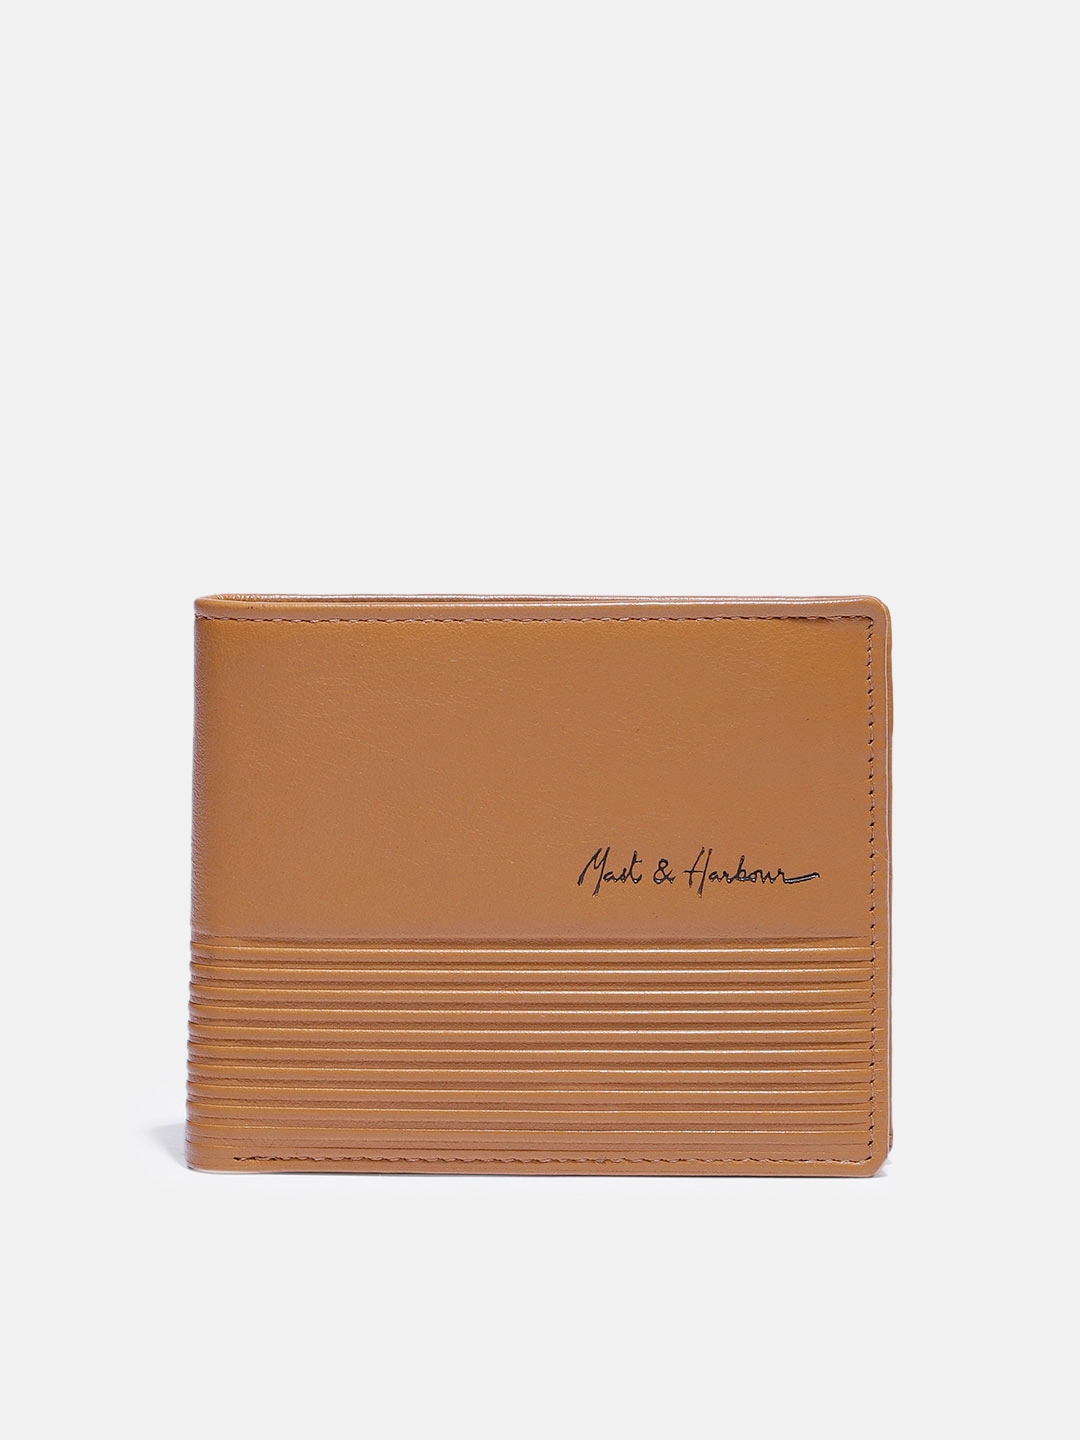 Two Toned Handcrafted Leather Tri-fold Wallet 